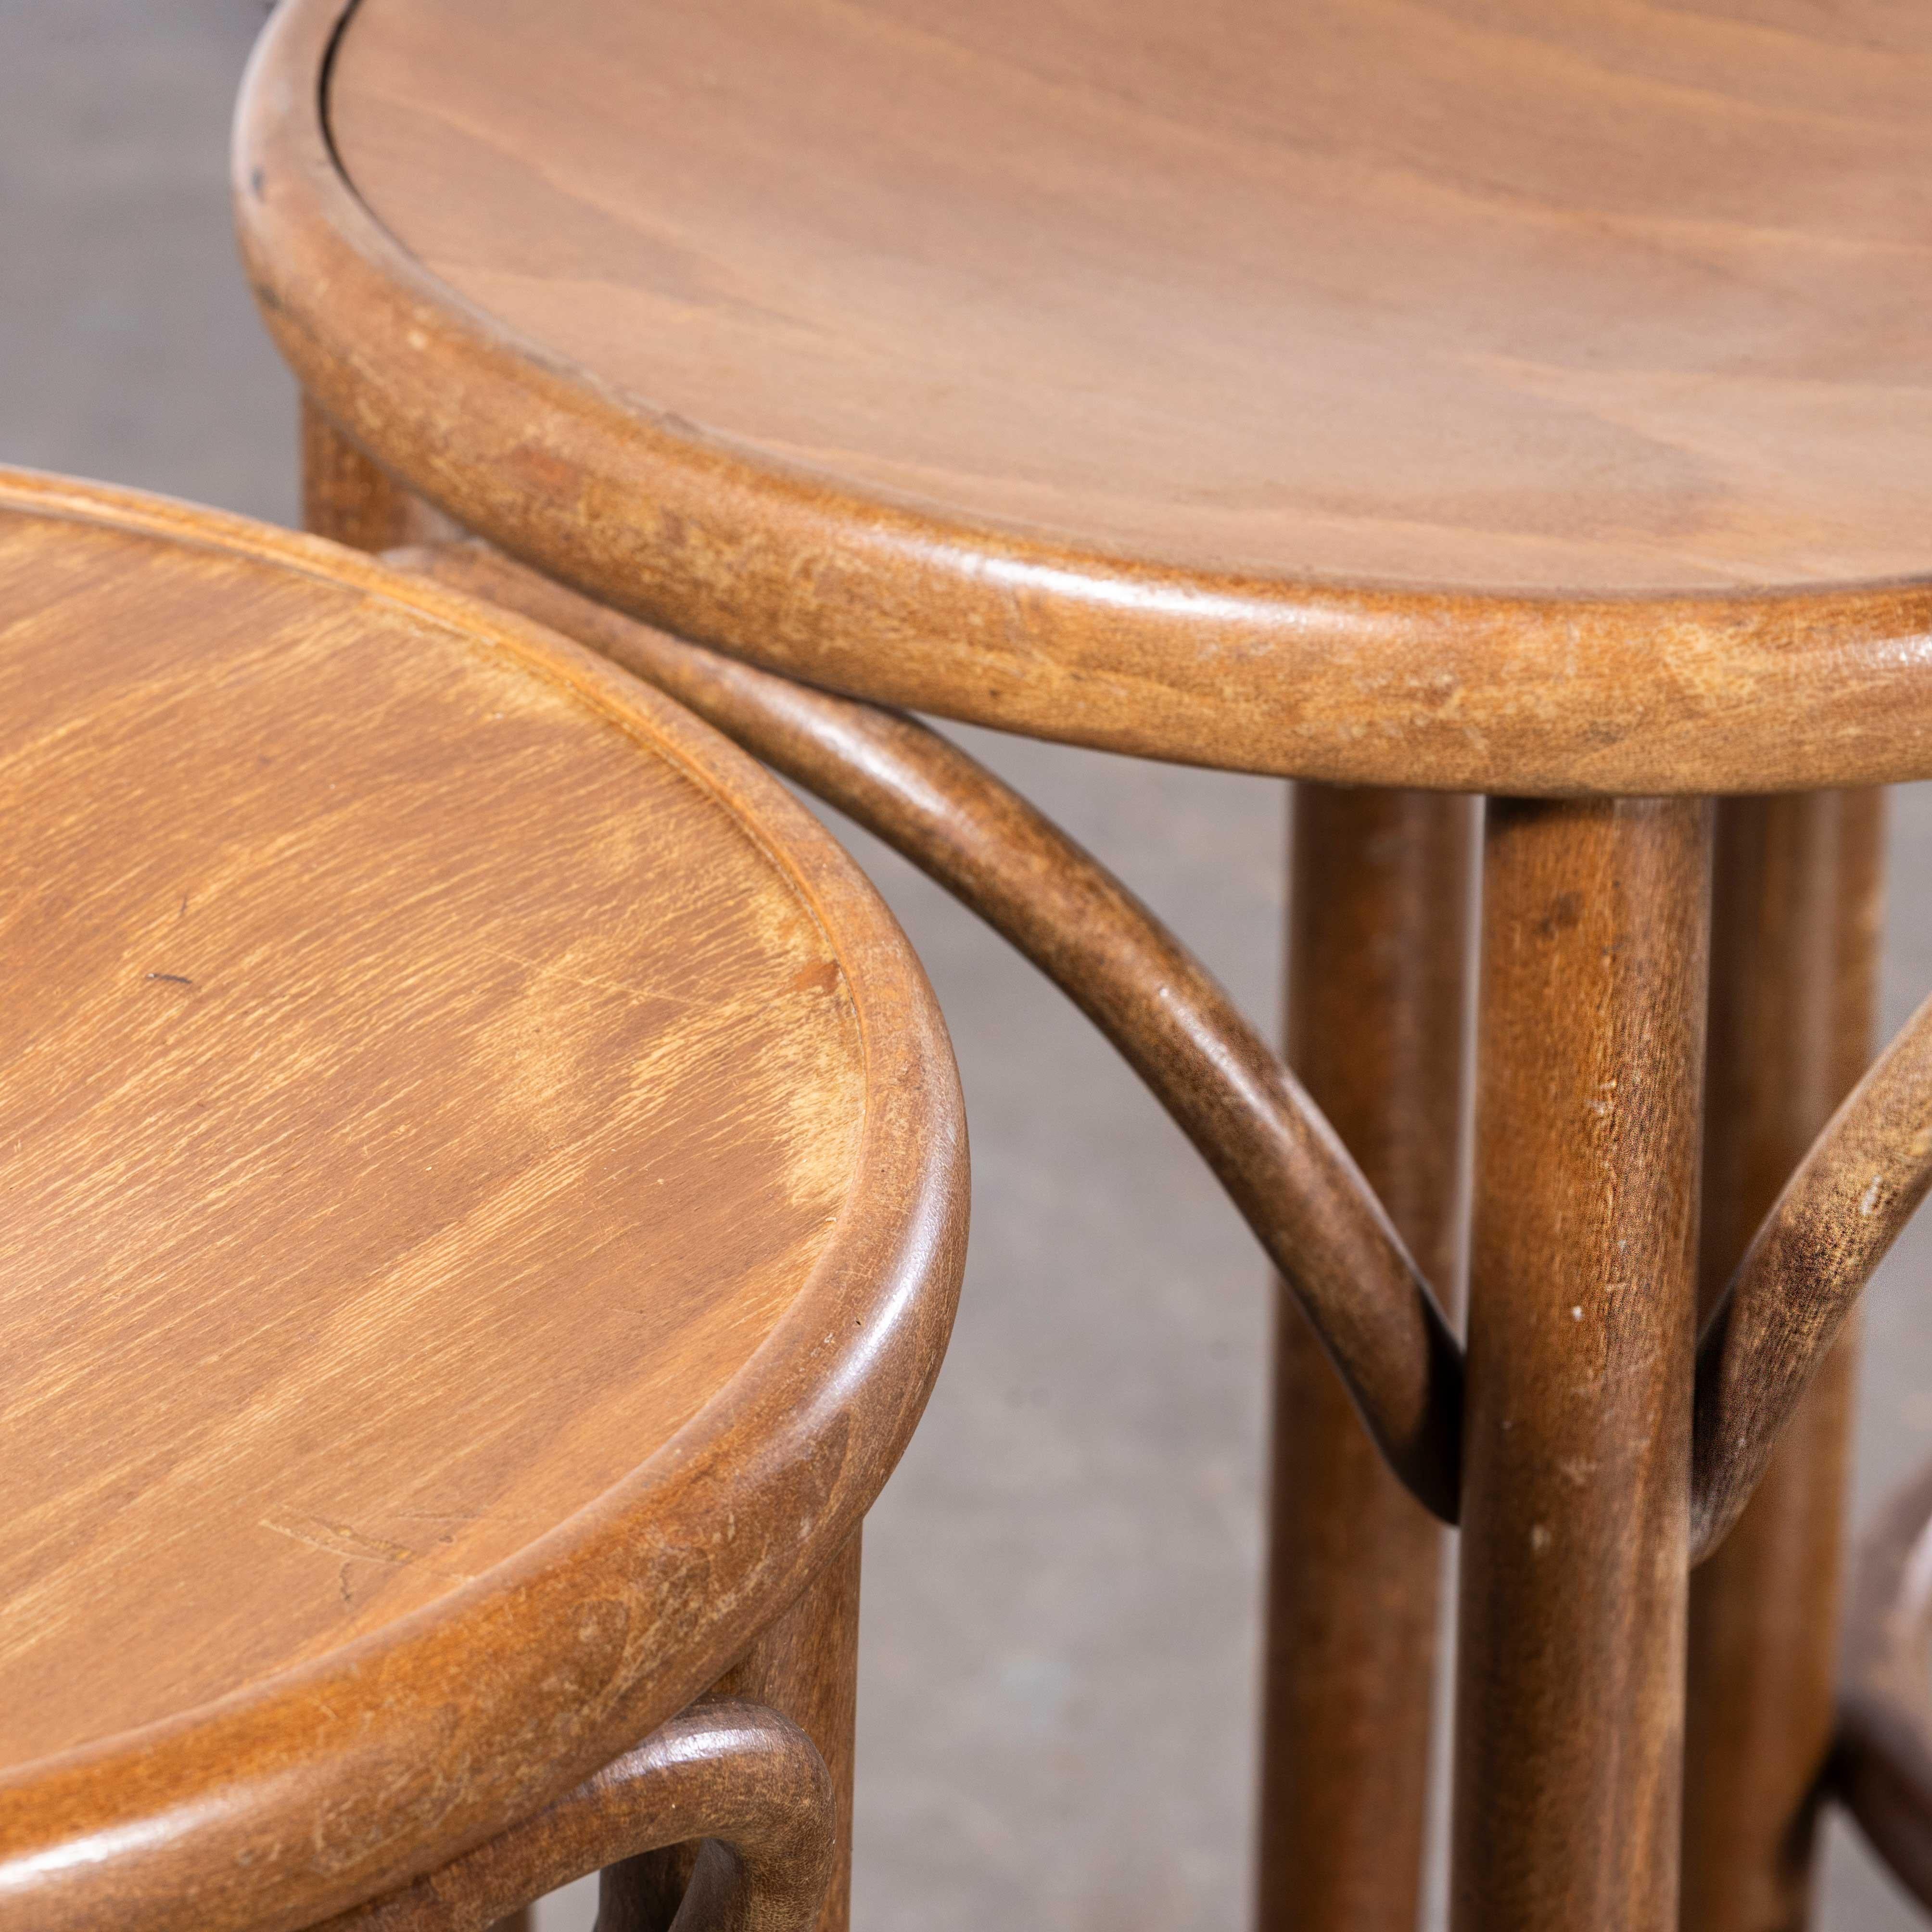 1960’s Classic Bentwood High Bar Stools – Set Of Three
1960’s Classic Bentwood Bar Stools – Set Of Three. Good quality set of six classic bentwood bar stools in a rich walnut colour. The stools were made in Eastern Europe using solid steam bent